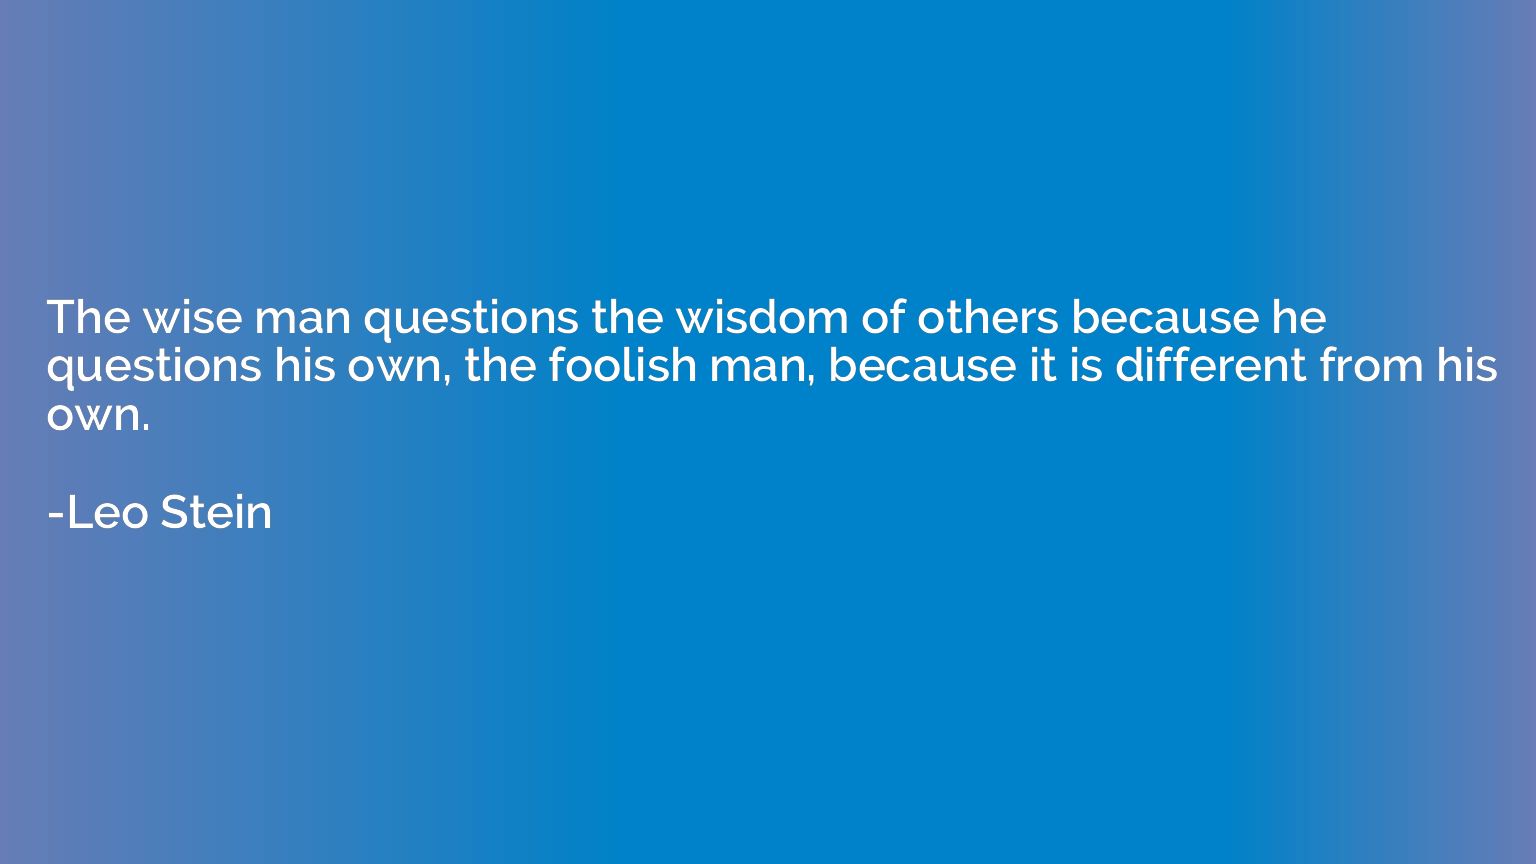 The wise man questions the wisdom of others because he quest